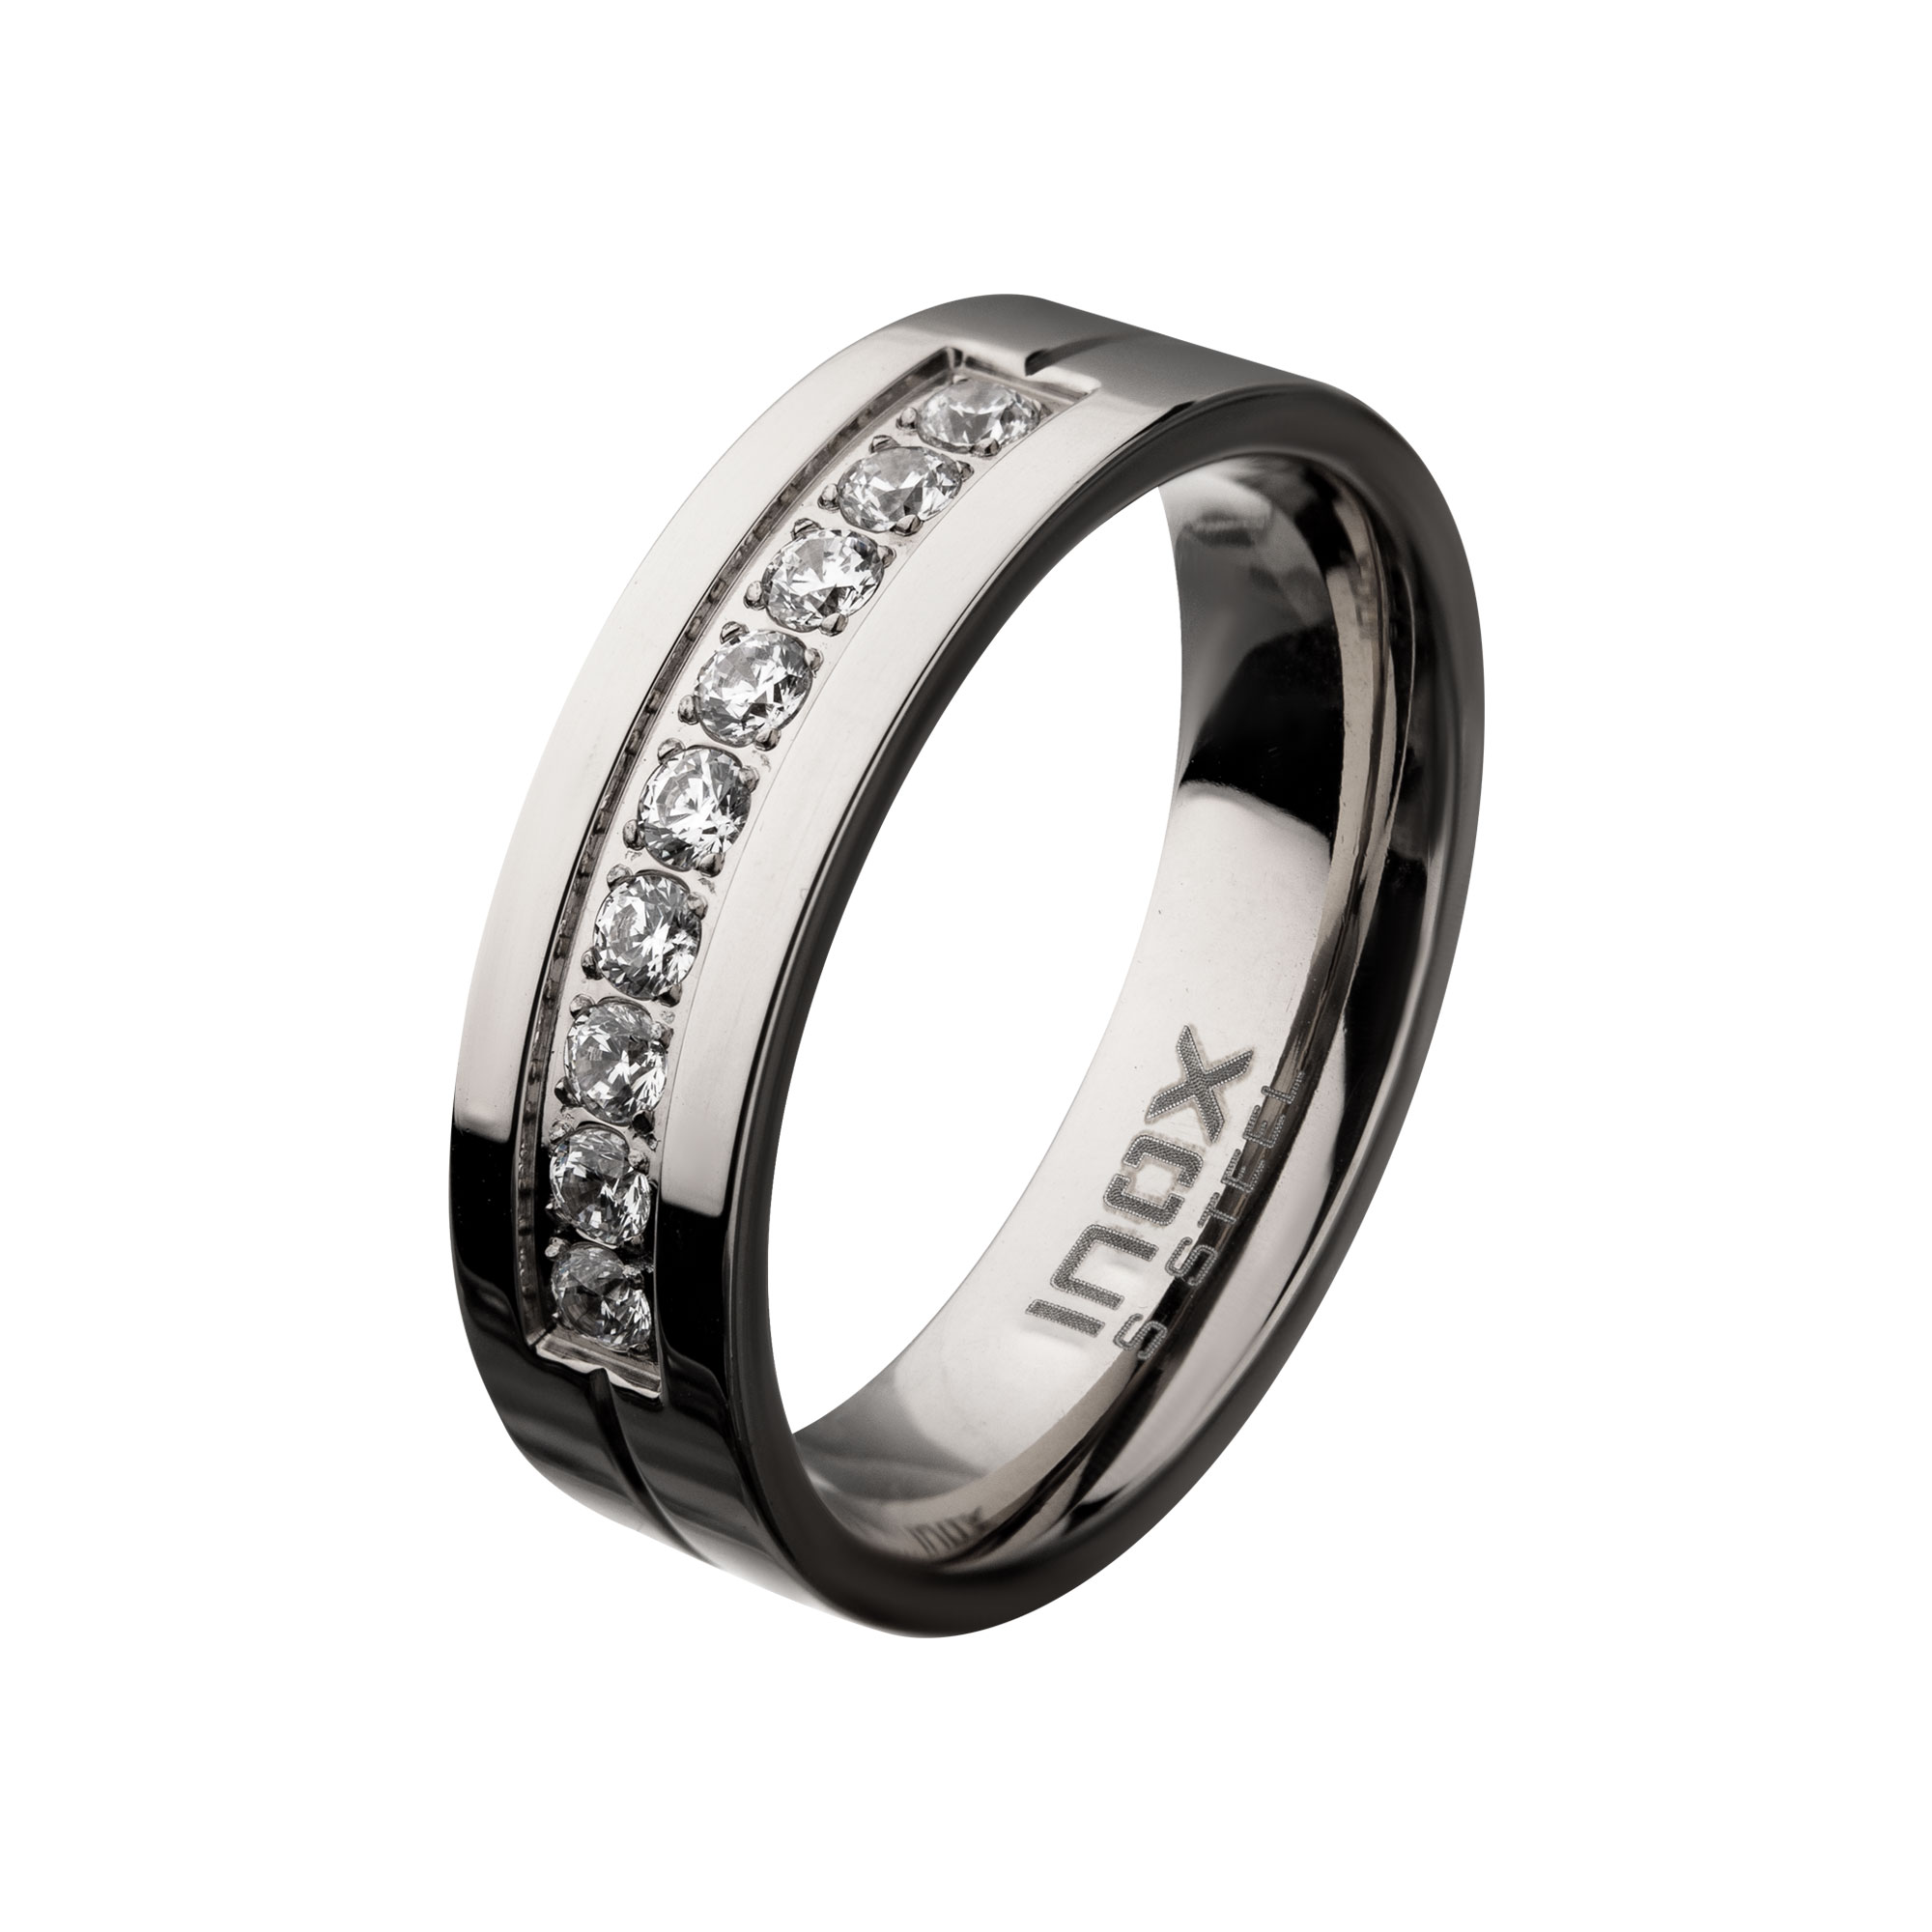 Stainless Steel Polished Steel ComfortFit Band with CZ's in Bead Channel Setting Ring Lewis Jewelers, Inc. Ansonia, CT